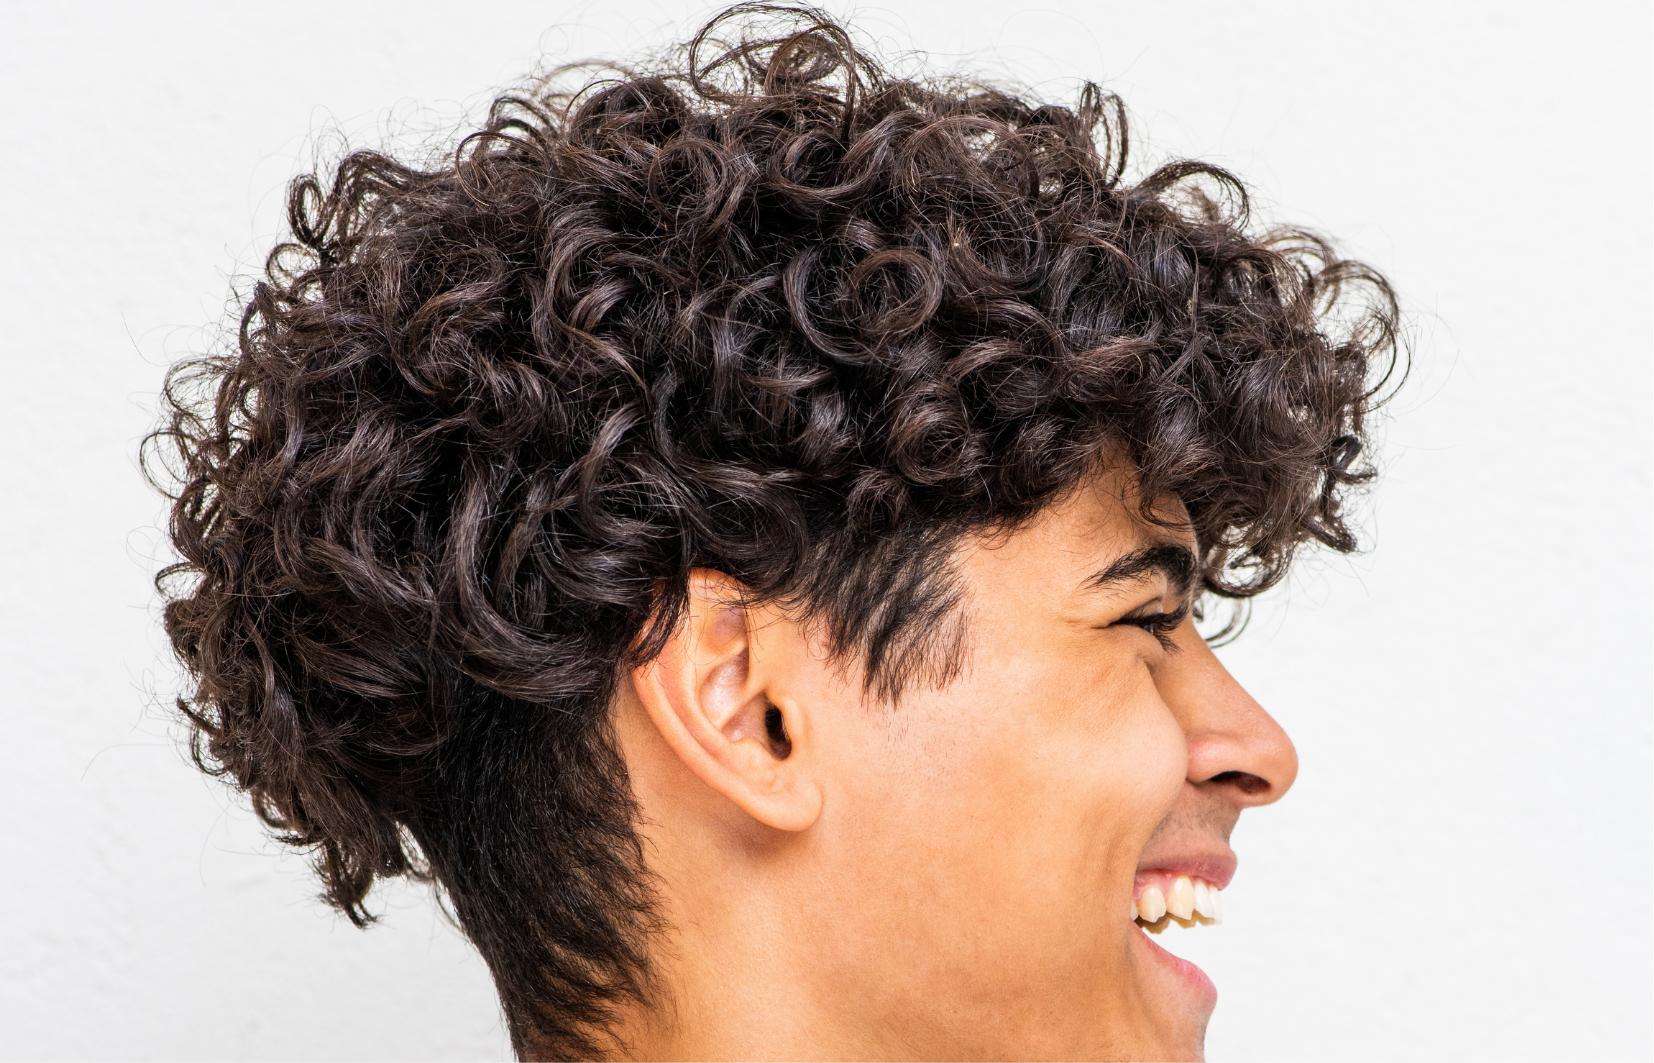 Show your curls with a curly high top, a stylish choice for natural texture and volume.